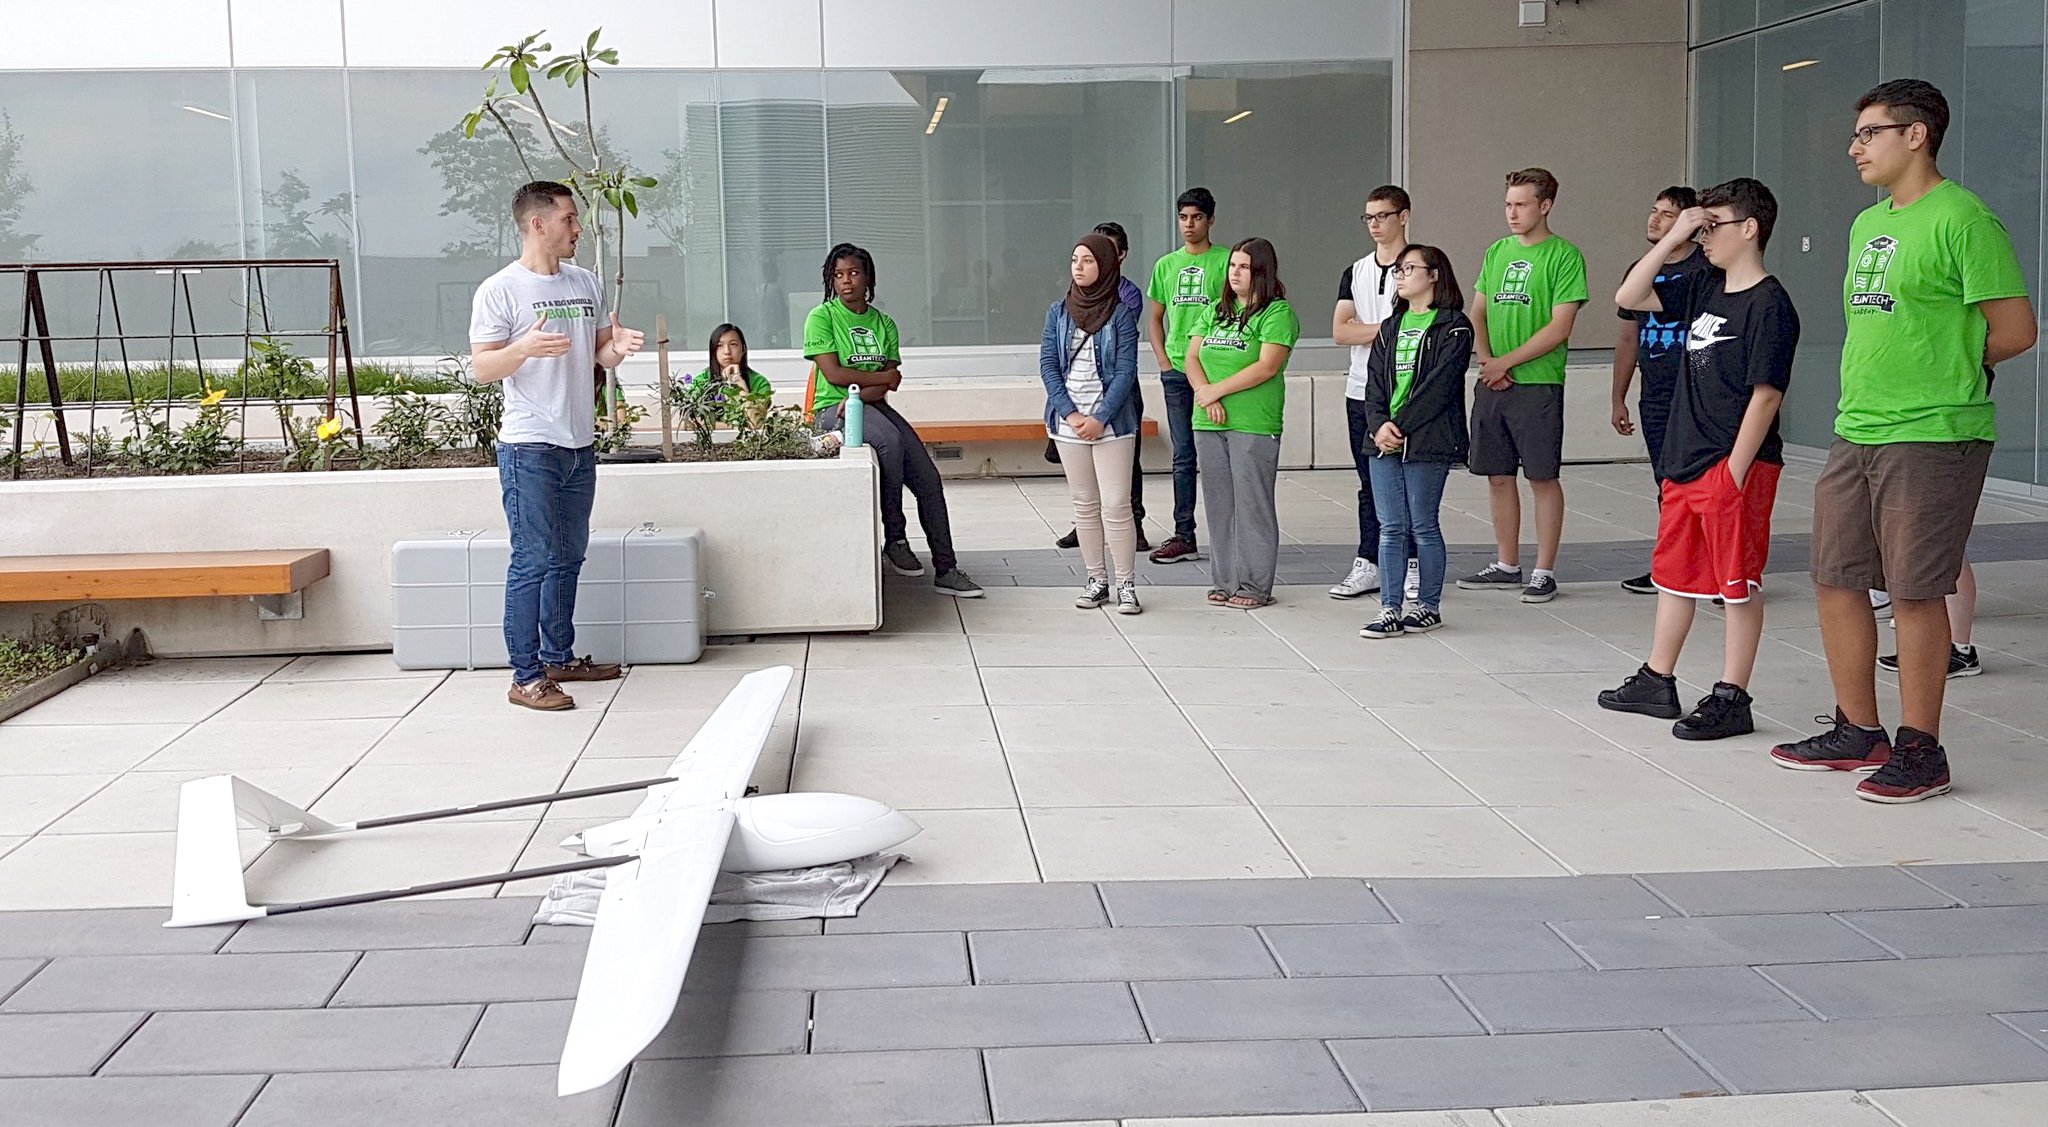 Ryan Cant of Envirodrone presenting to the students of CleanTech academy.